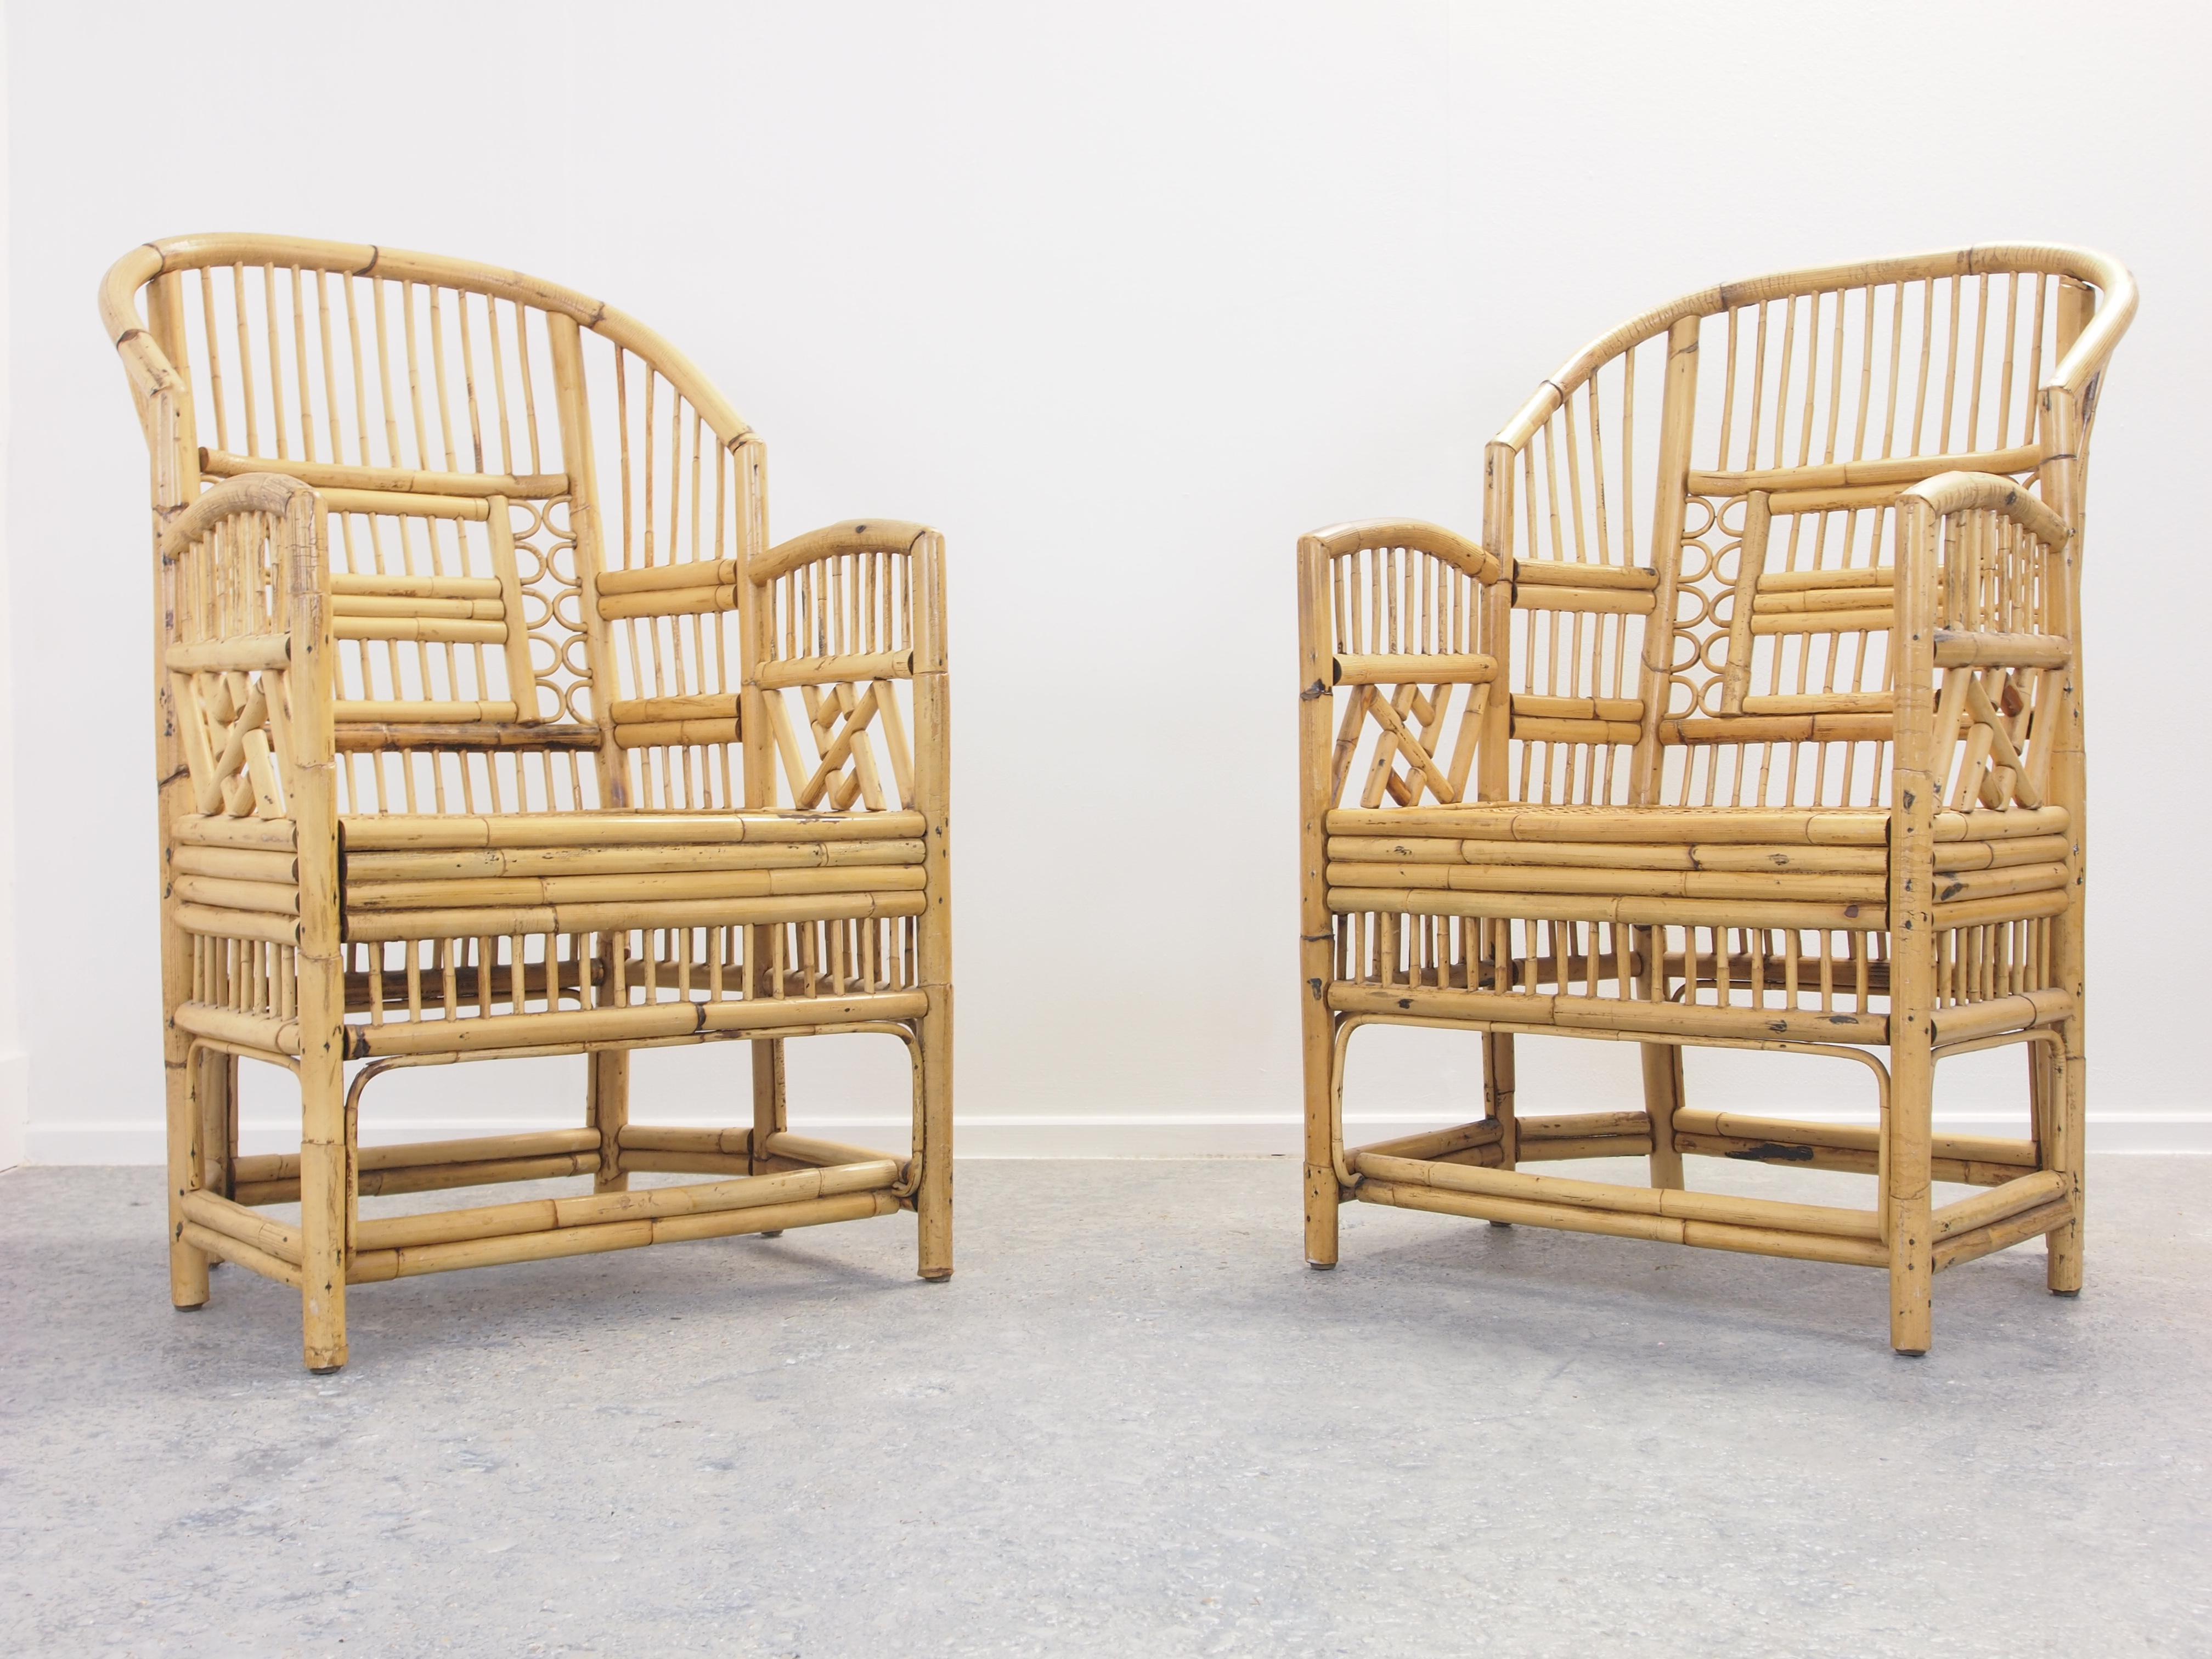 20th Century Pair of 2 Vintage Chinese Chippendale/Brighton Pavilion Rattan Chairs